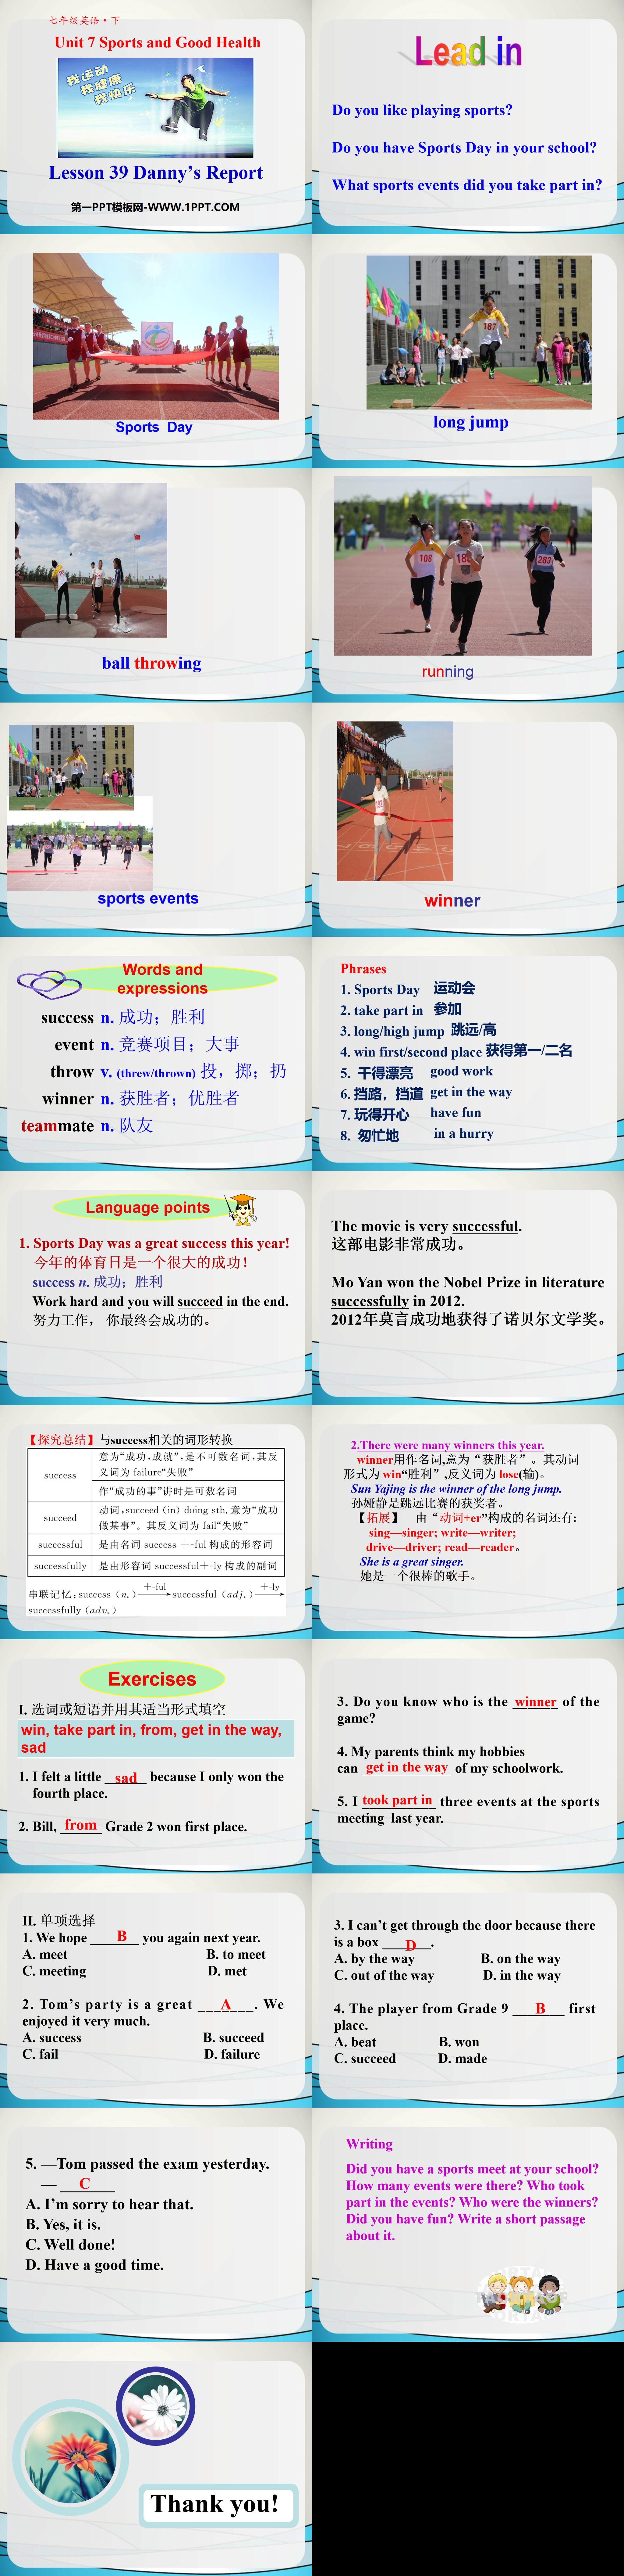 《Danny's Report》Sports and Good Health PPT
（2）